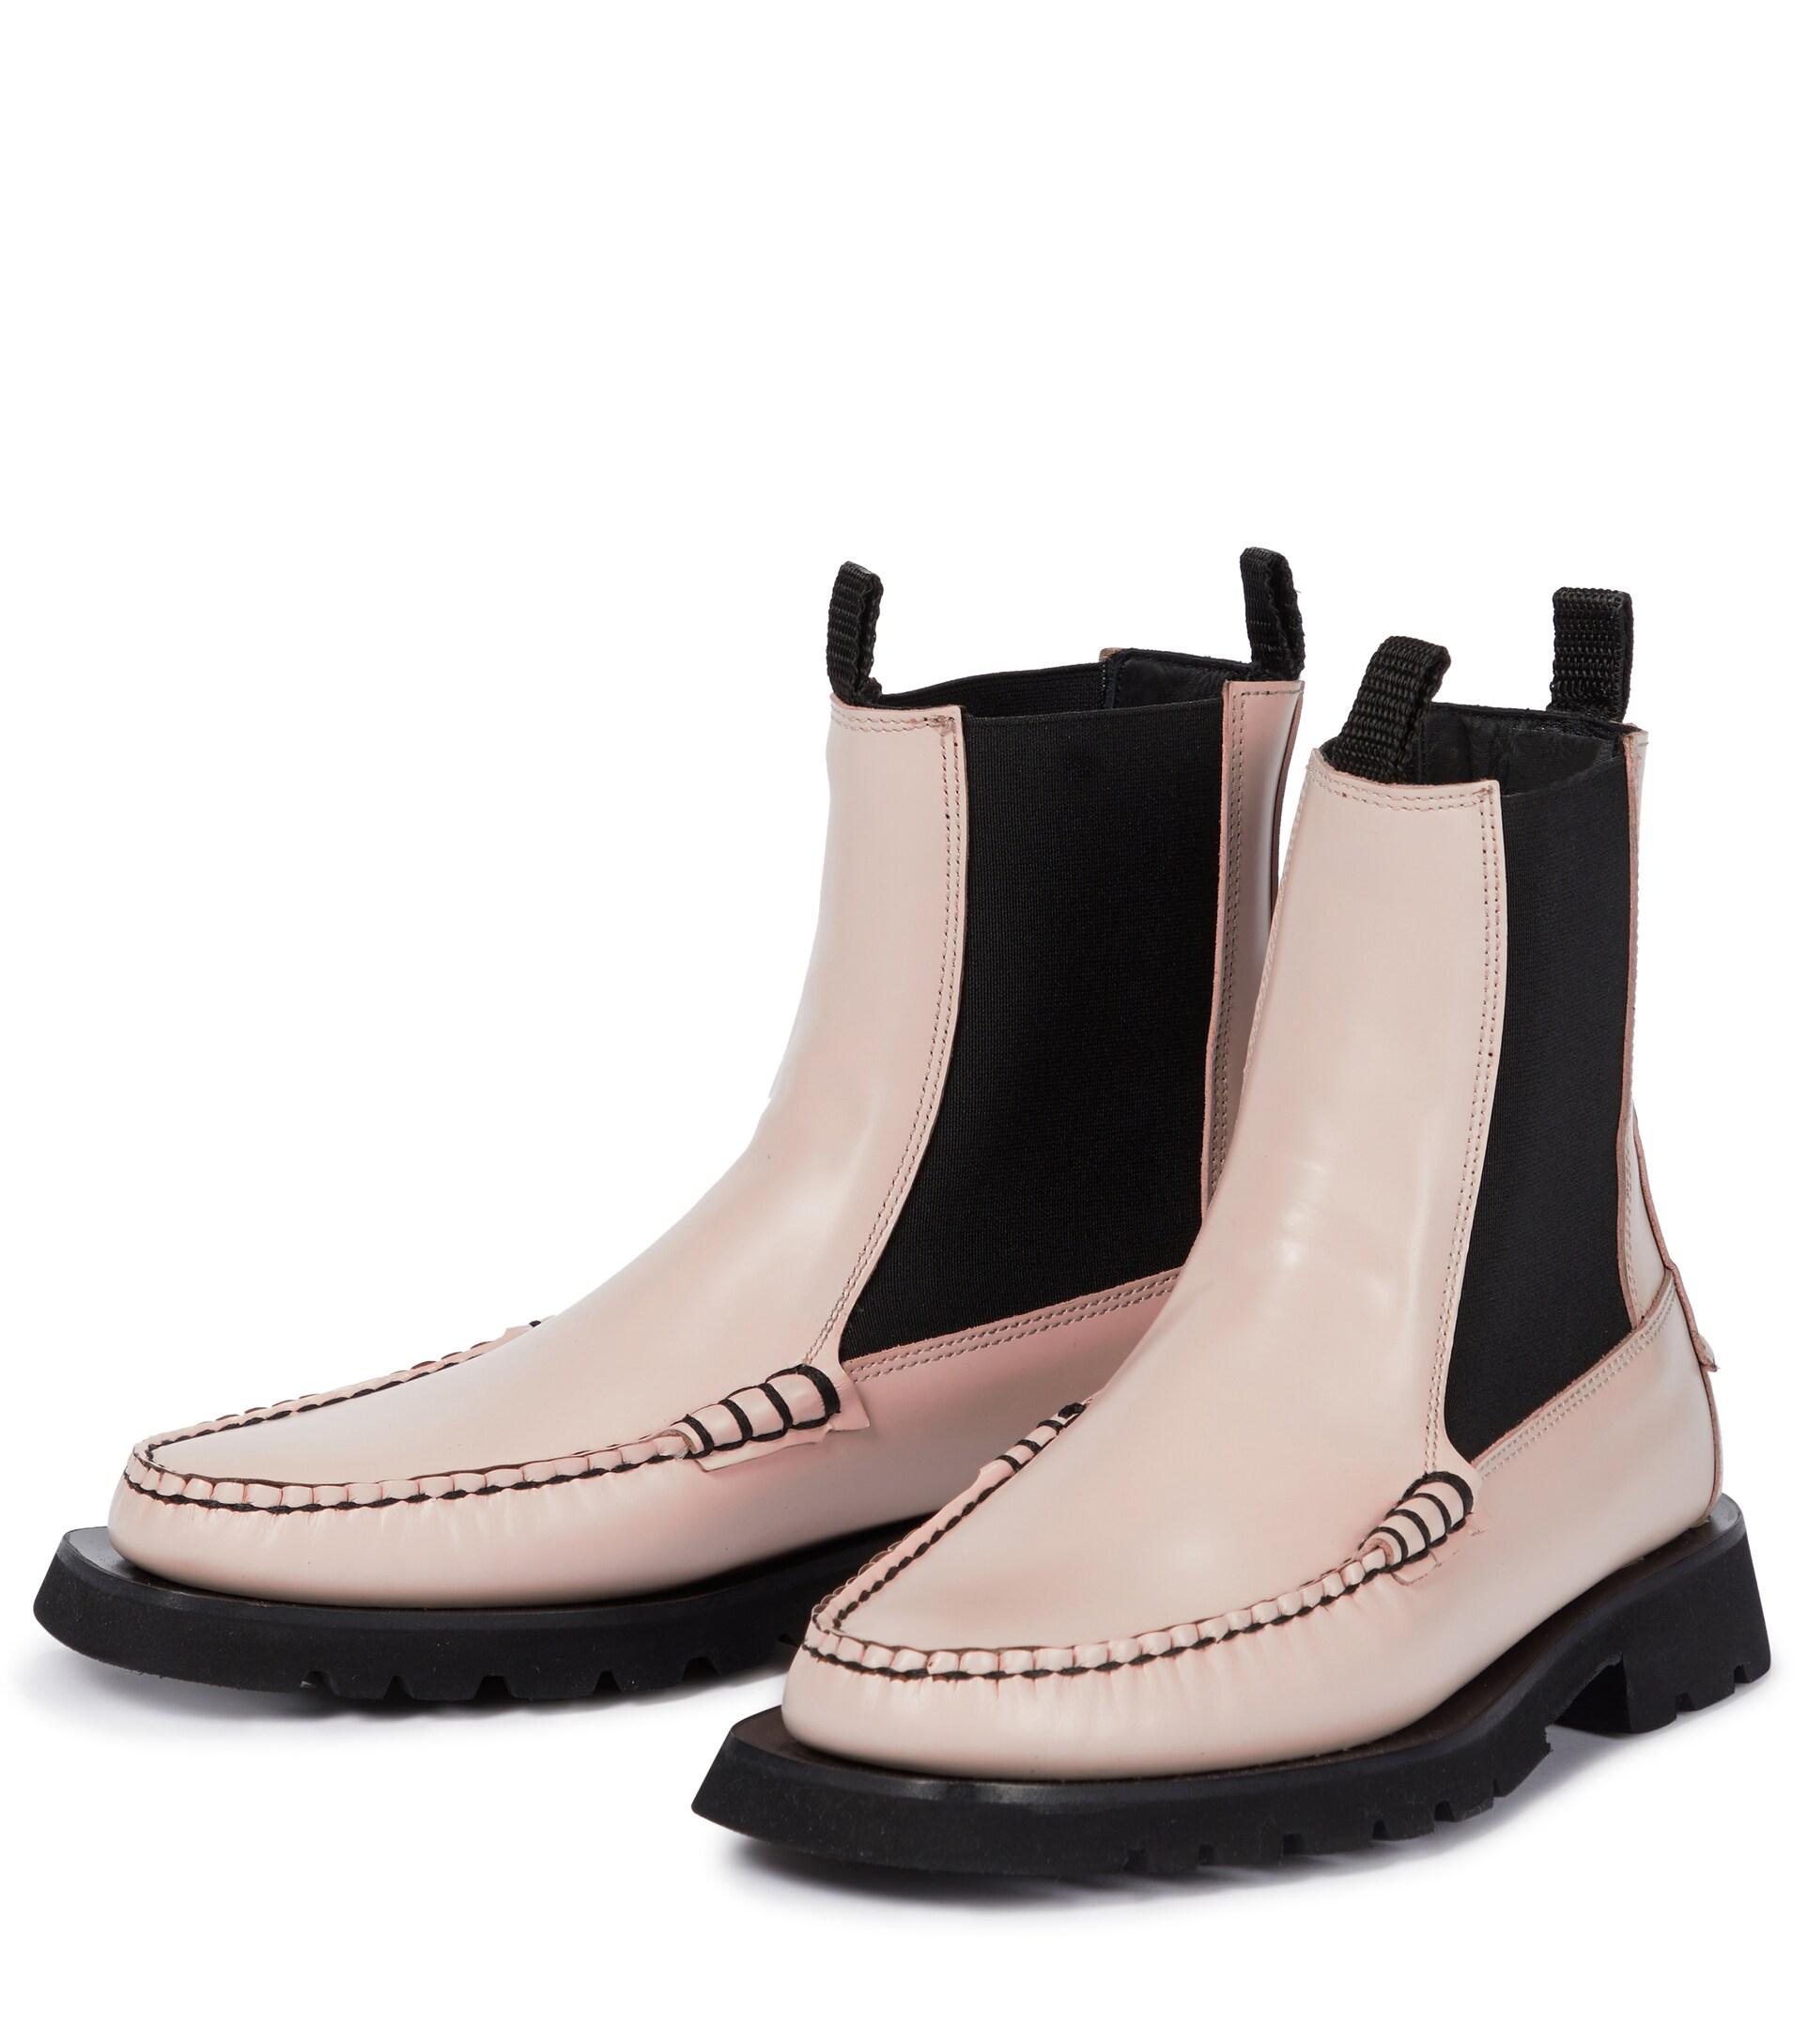 Cecilie Bahnsen X Hereu Alda Leather Chelsea Boots in Pink | Lyst